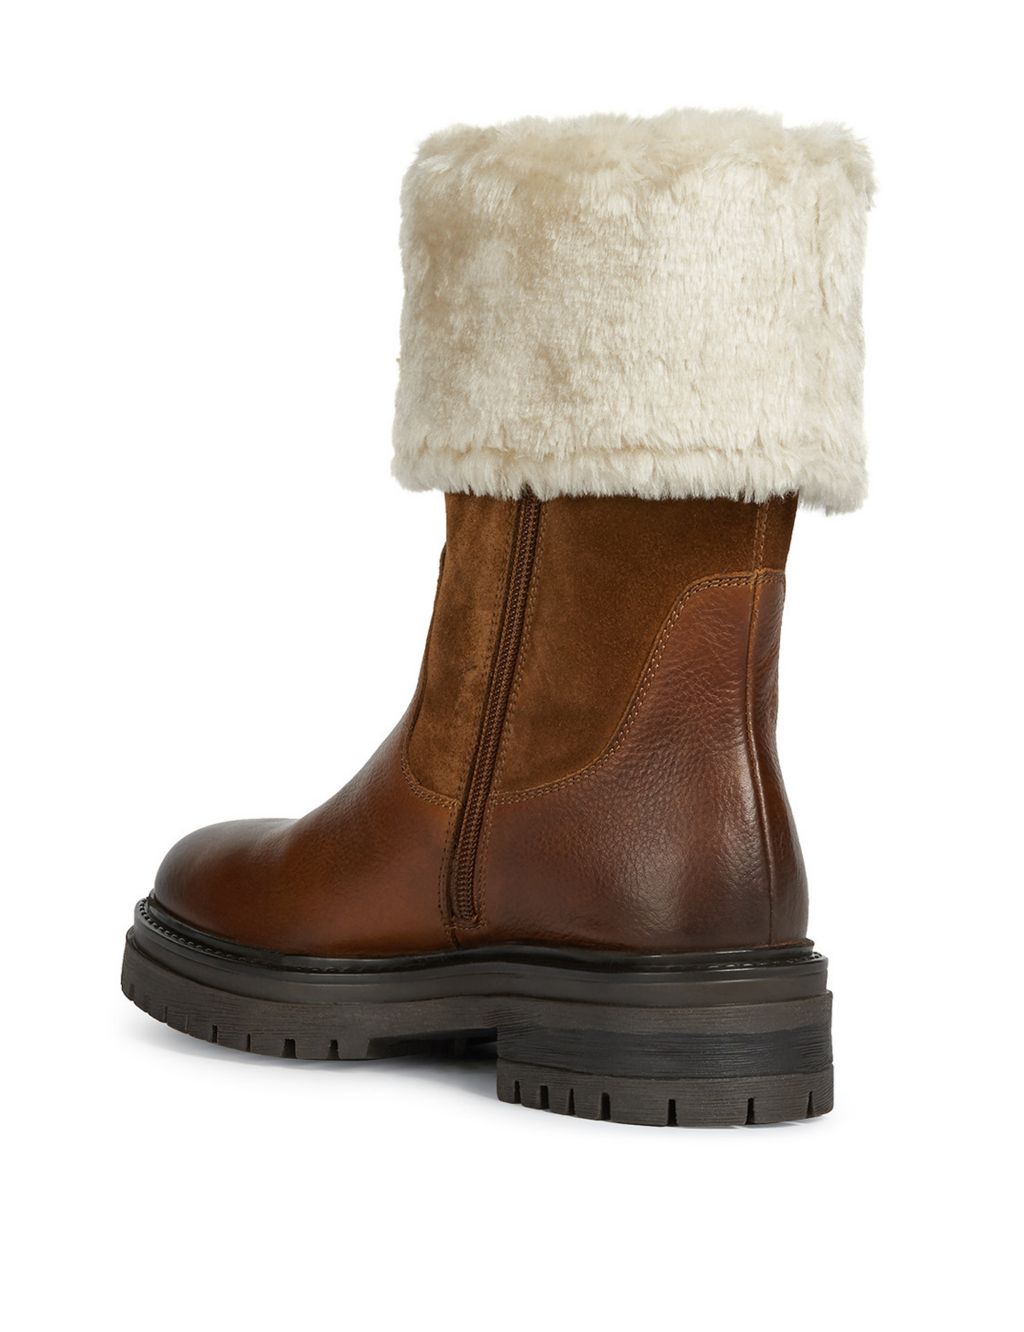 Leather Faux Fur Chunky Winter Boots image 3